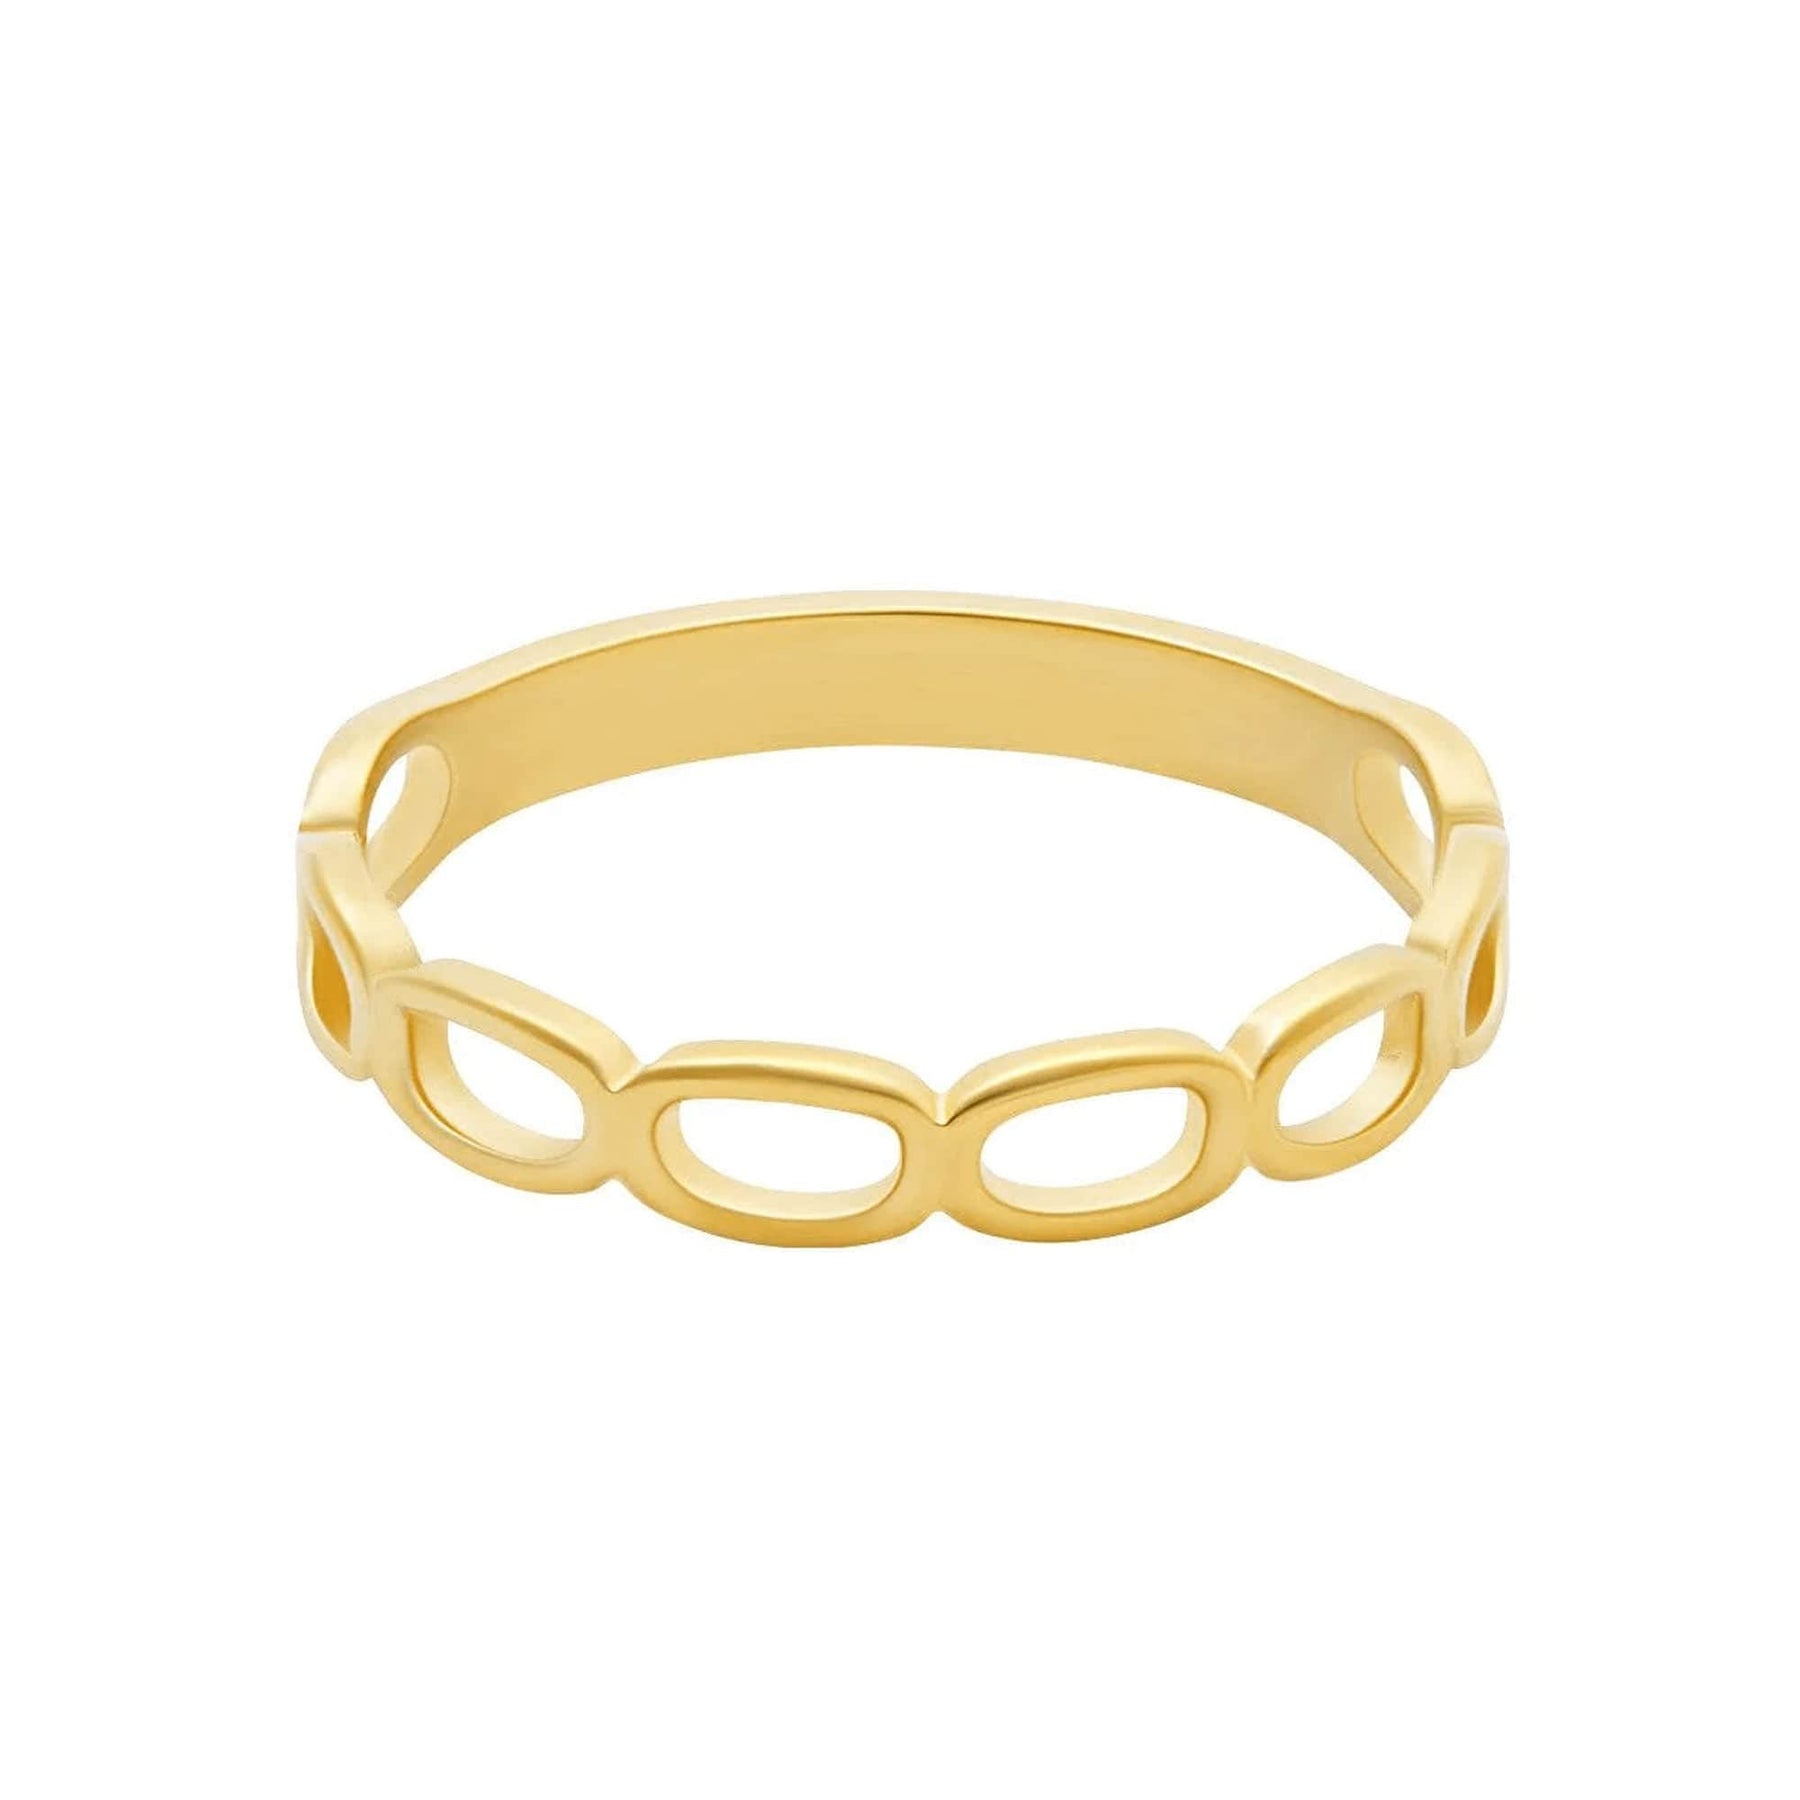 BohoMoon Stainless Steel Chain Ring